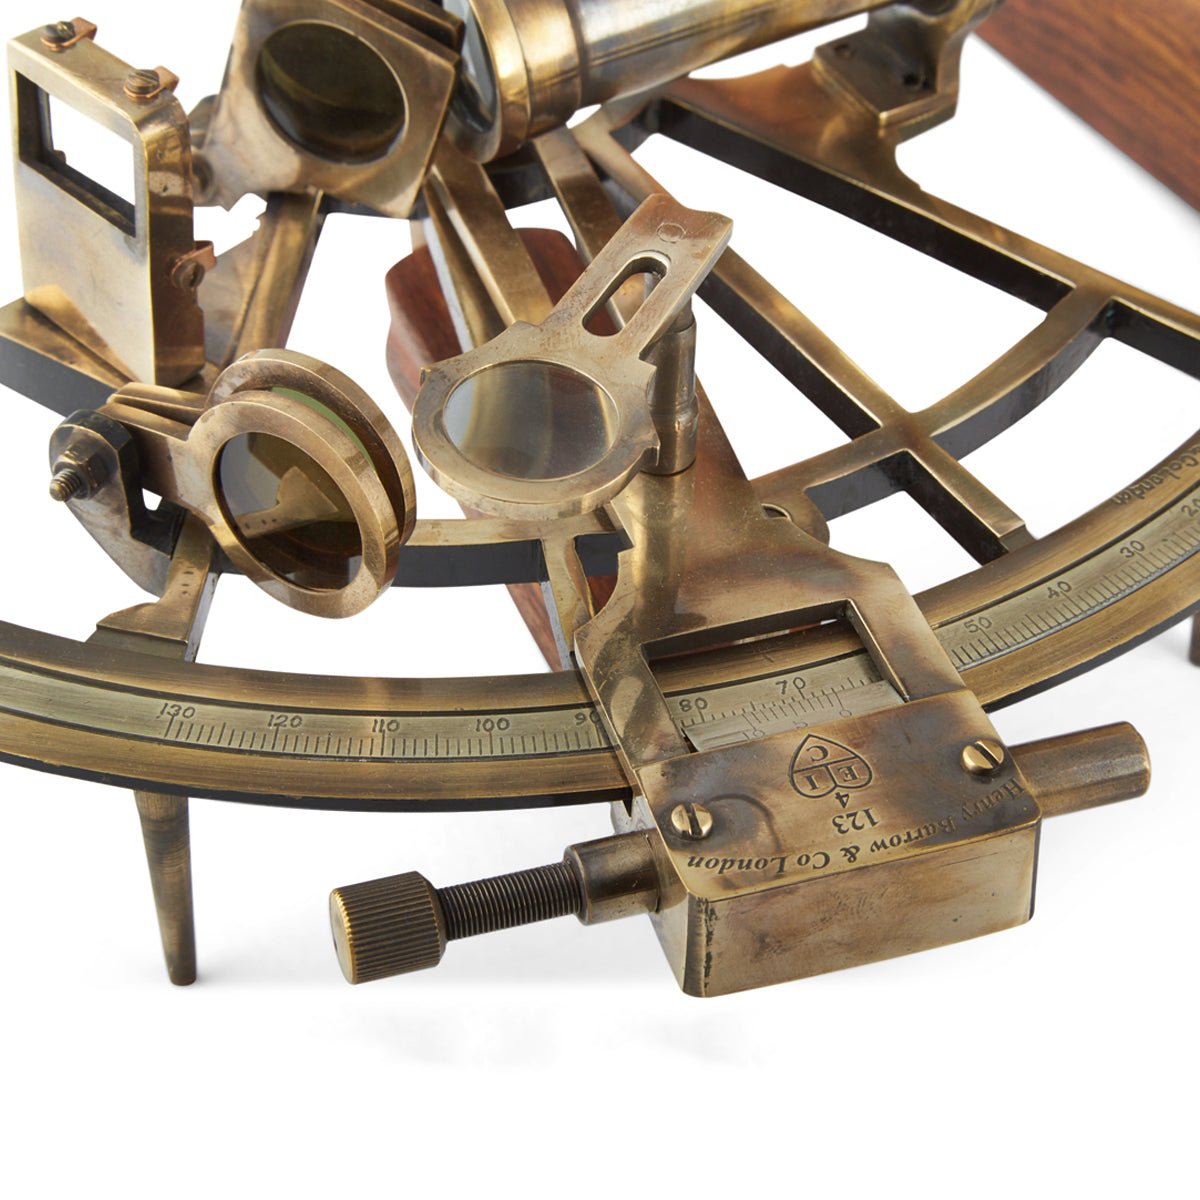 MALL INC. Sextant, Brass Hand-Made 9 Sextant, Nautical Working Sextant, Marine NAVIGATIONAL Ship Instrument